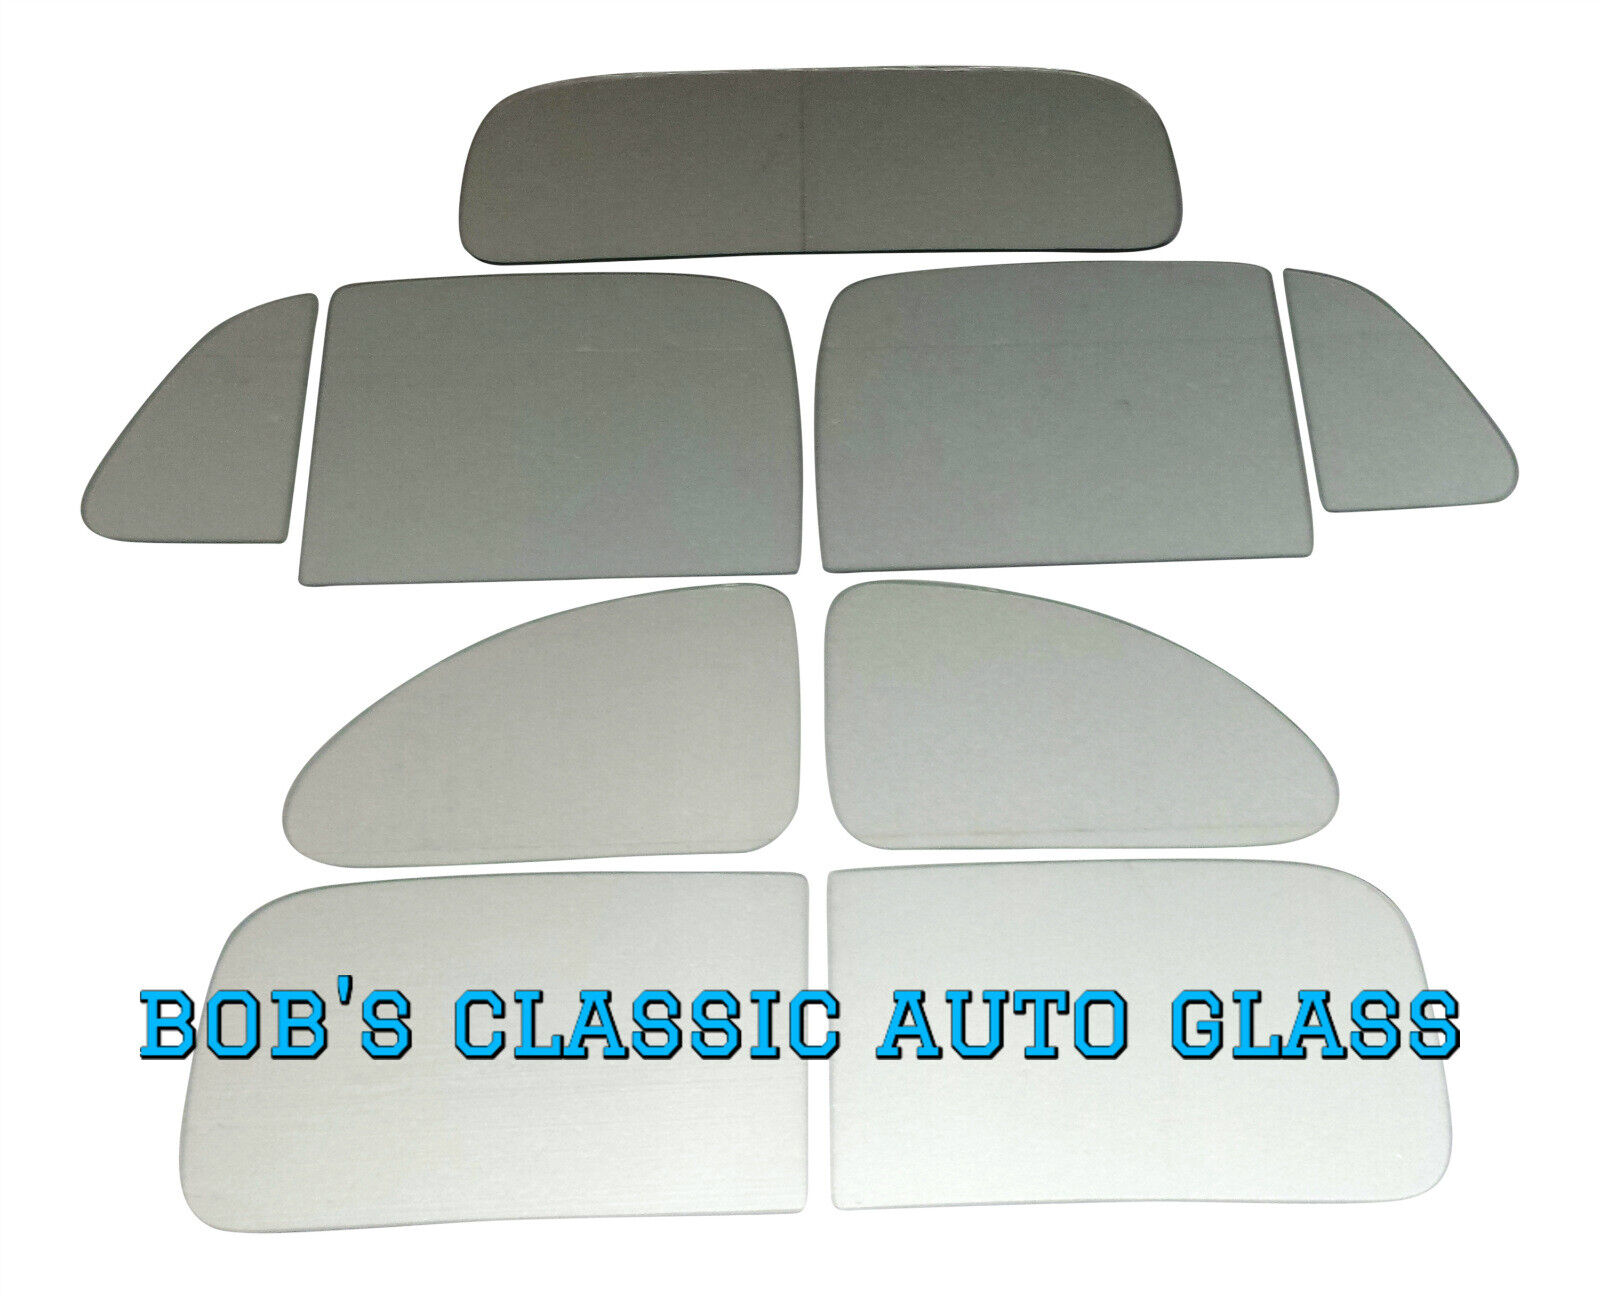 1939 OLDSMOBILE 5 WINDOW COUPE WINDOWS CLASSIC AUTO GLASS OLDS NEW CAR